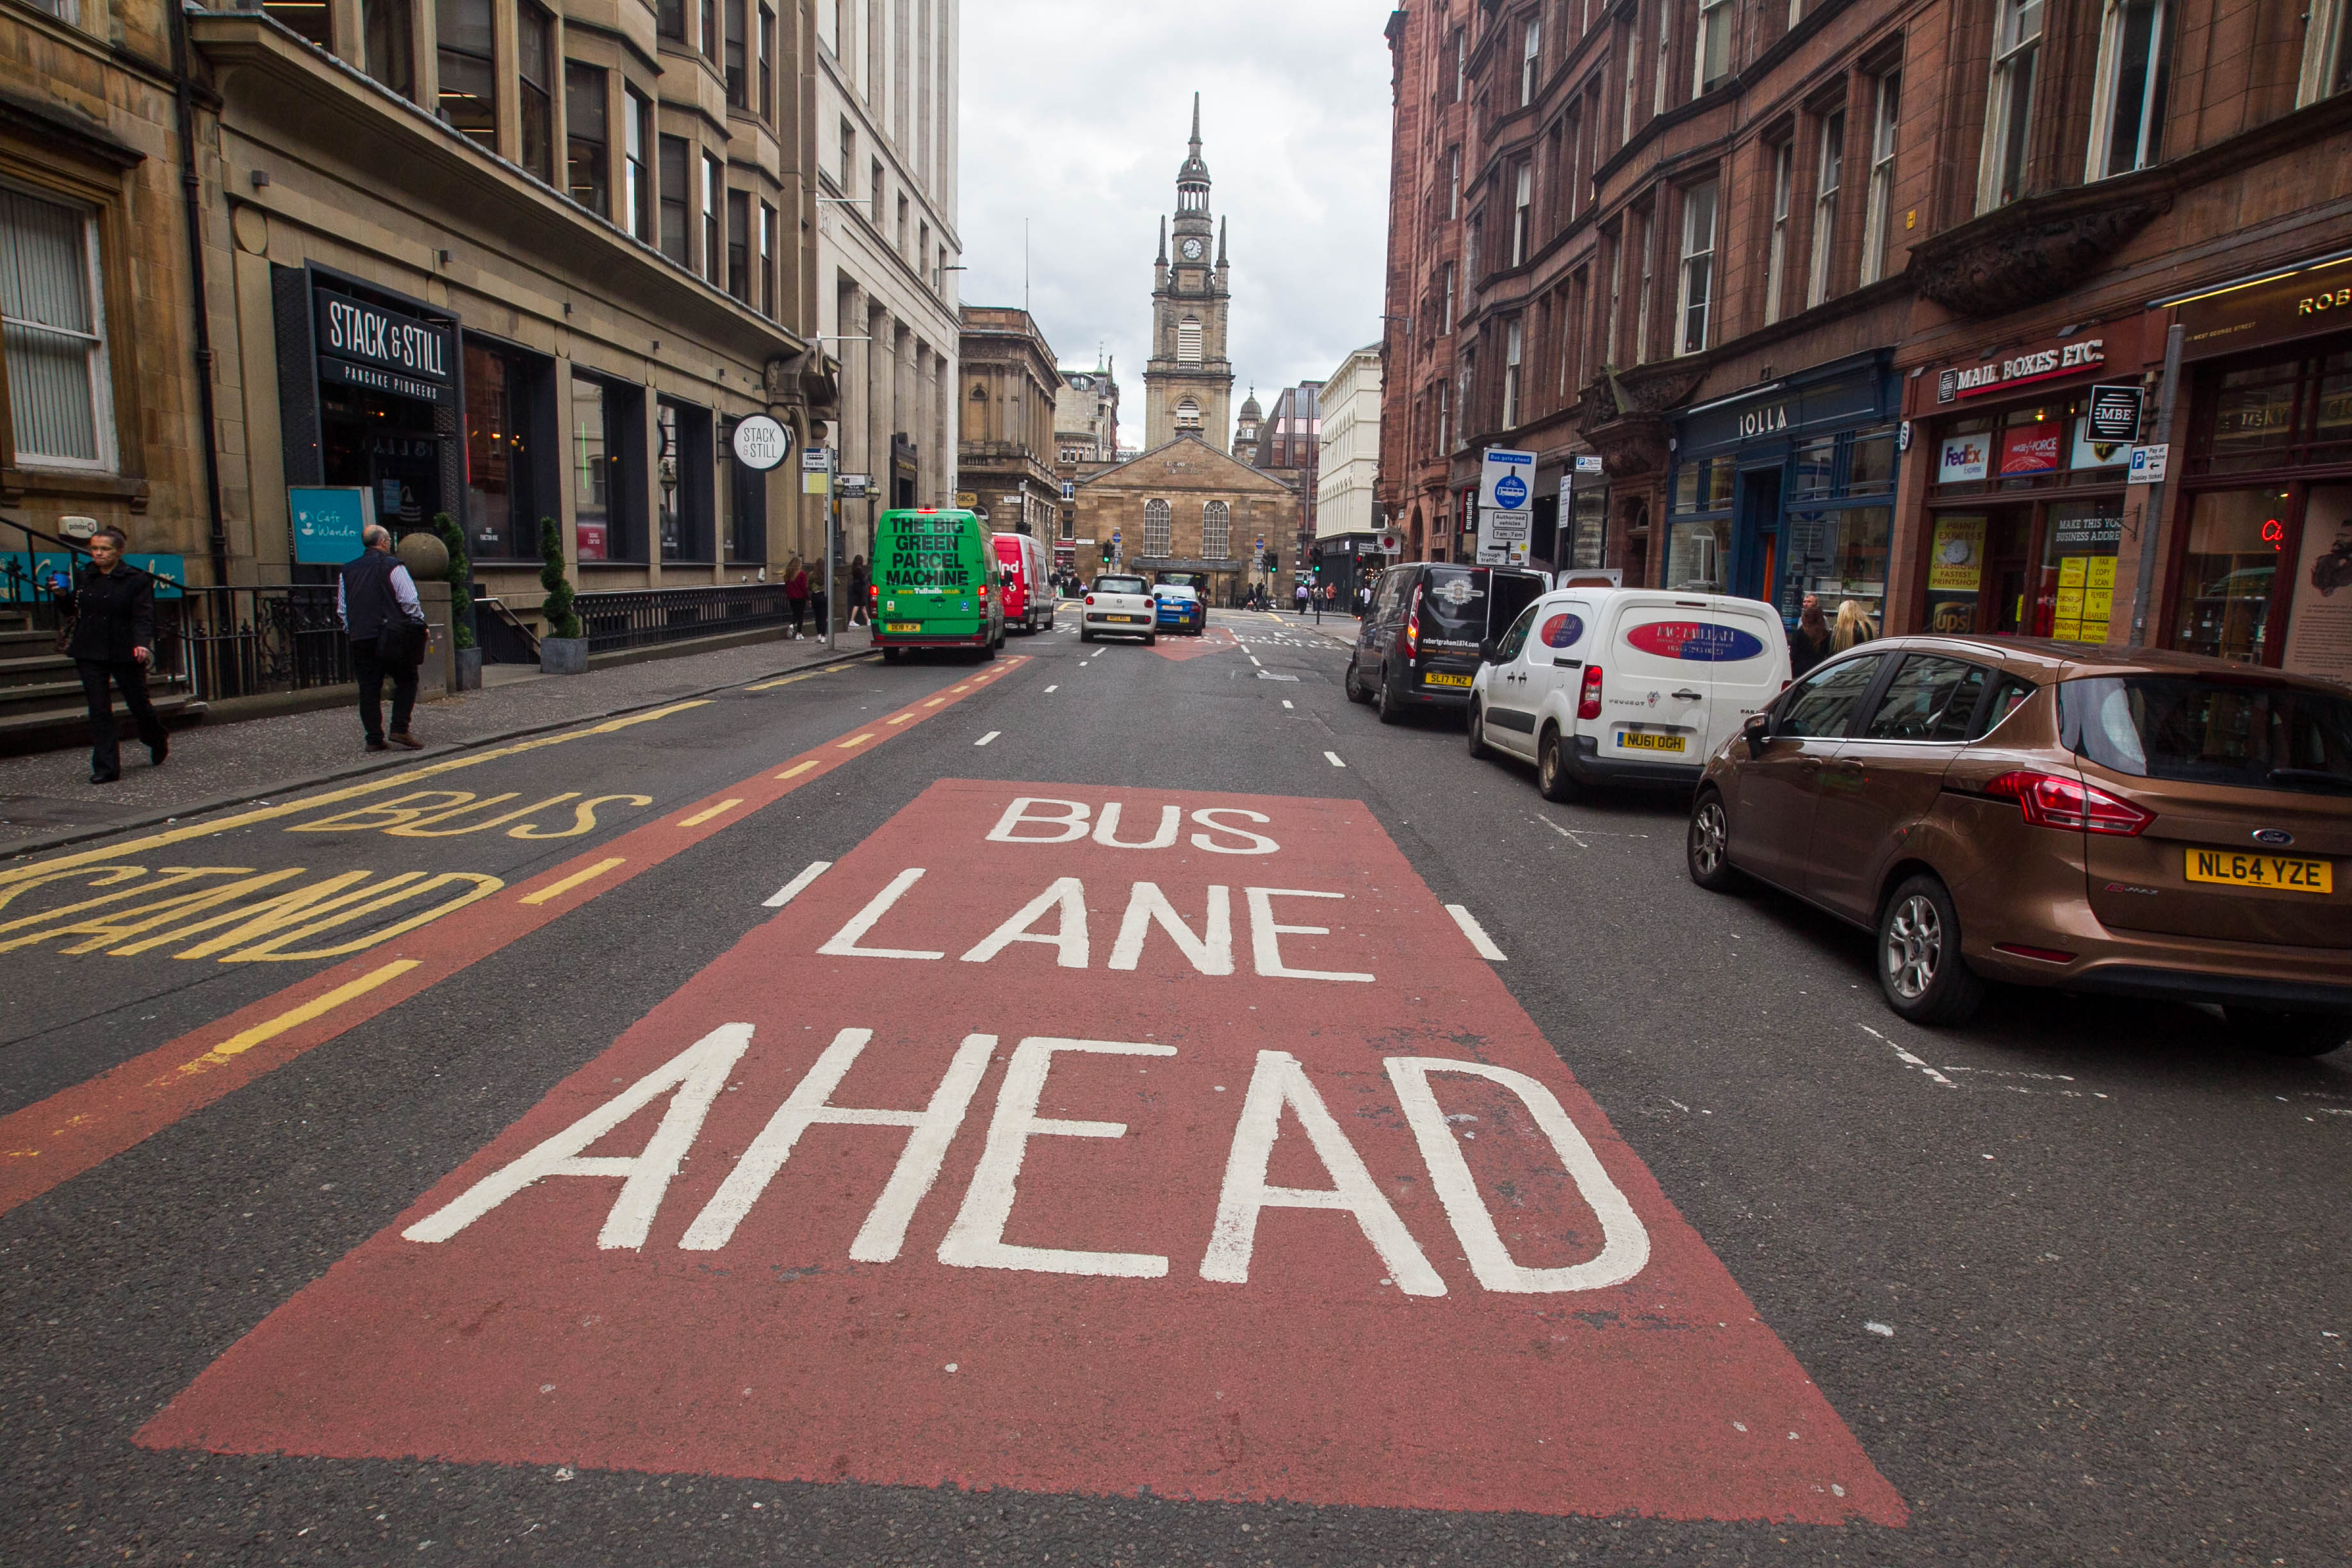 One of Glasgow's existing bus lanes on West George St